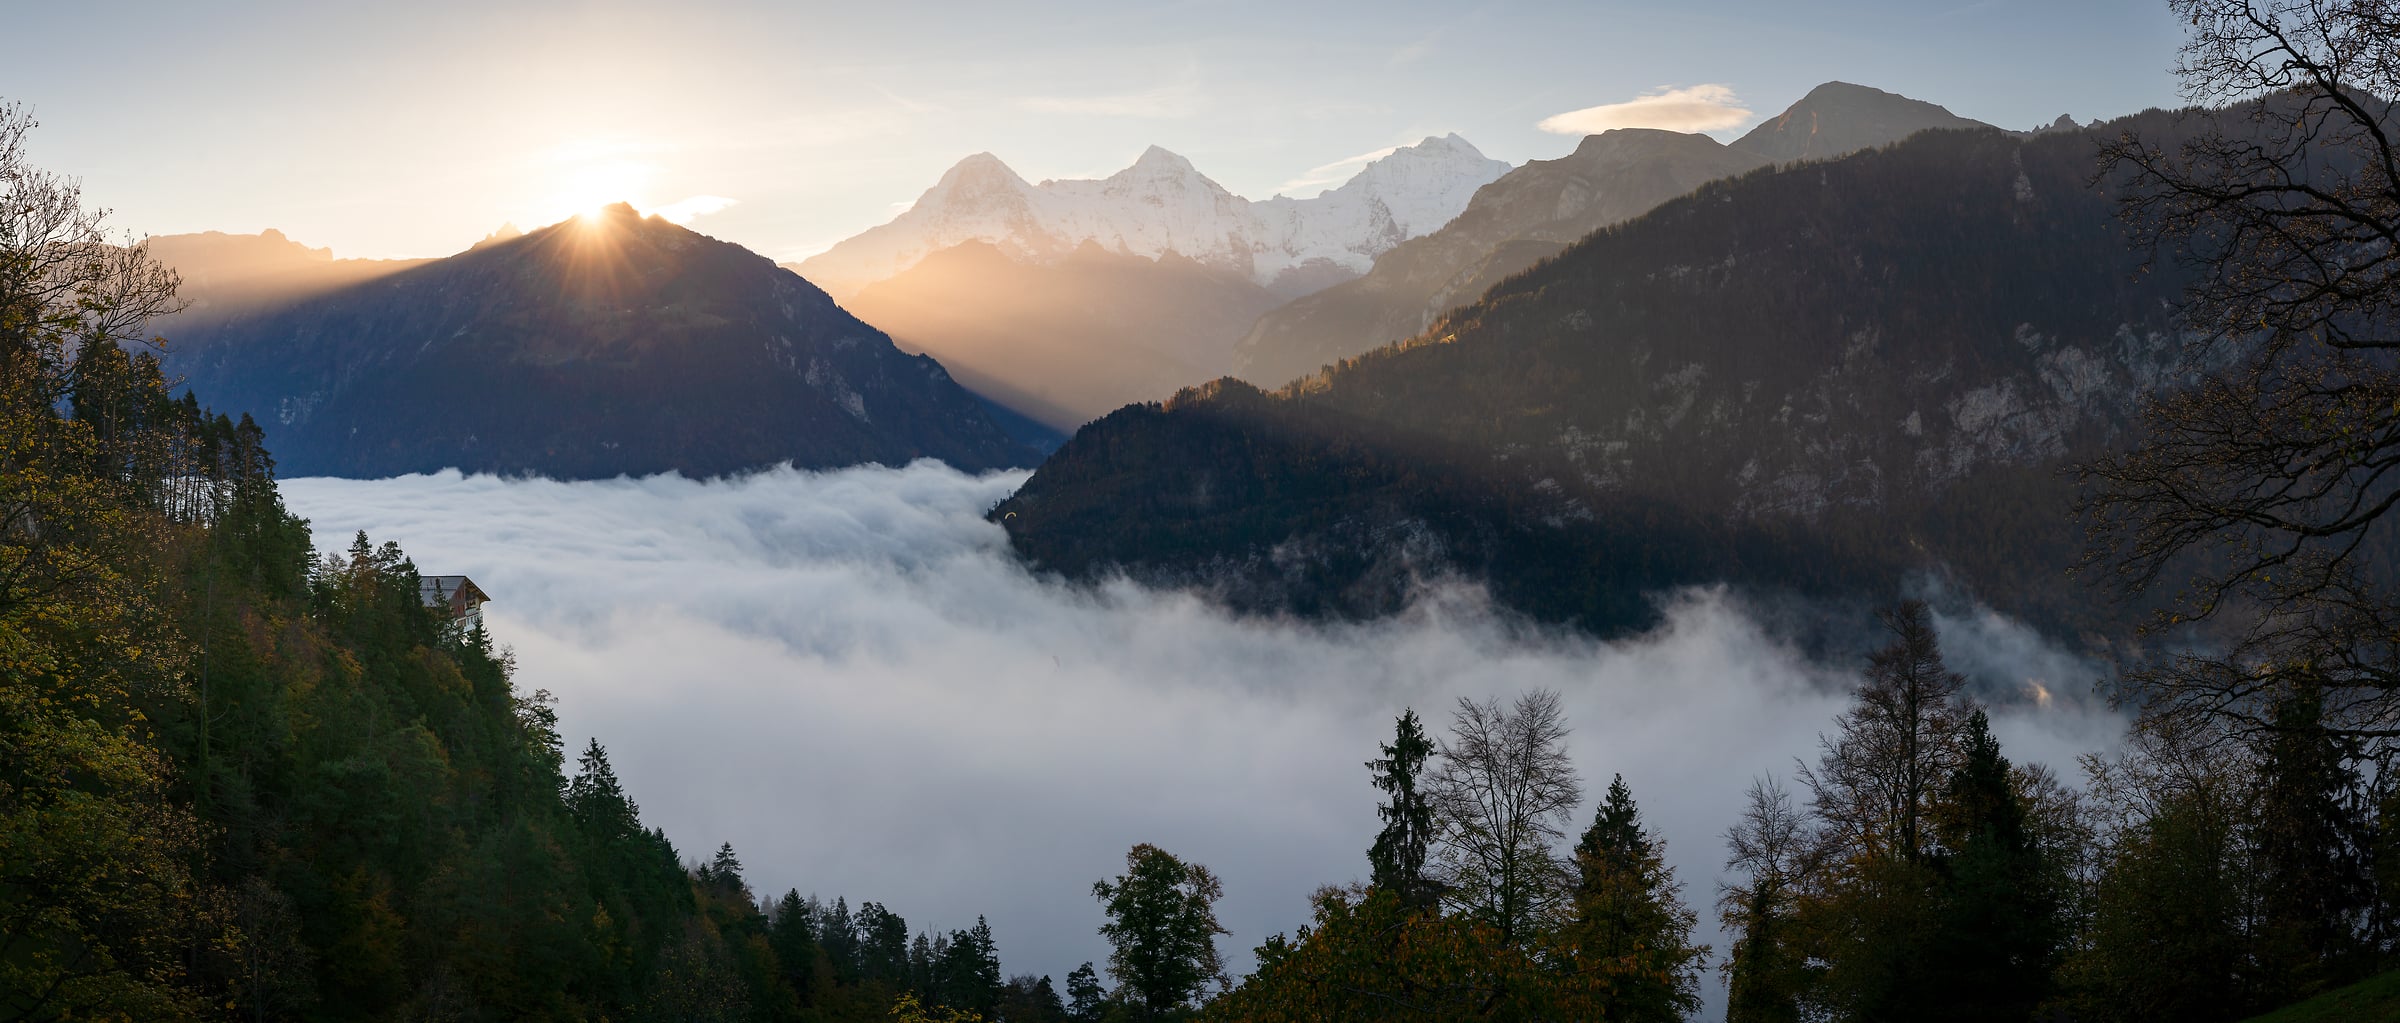 231 megapixels! A very high resolution, large-format VAST photo print of sunrise over mountains with clouds in a valley; landscape photograph created by Jeff Lewis in Interlaken, Switzerland.